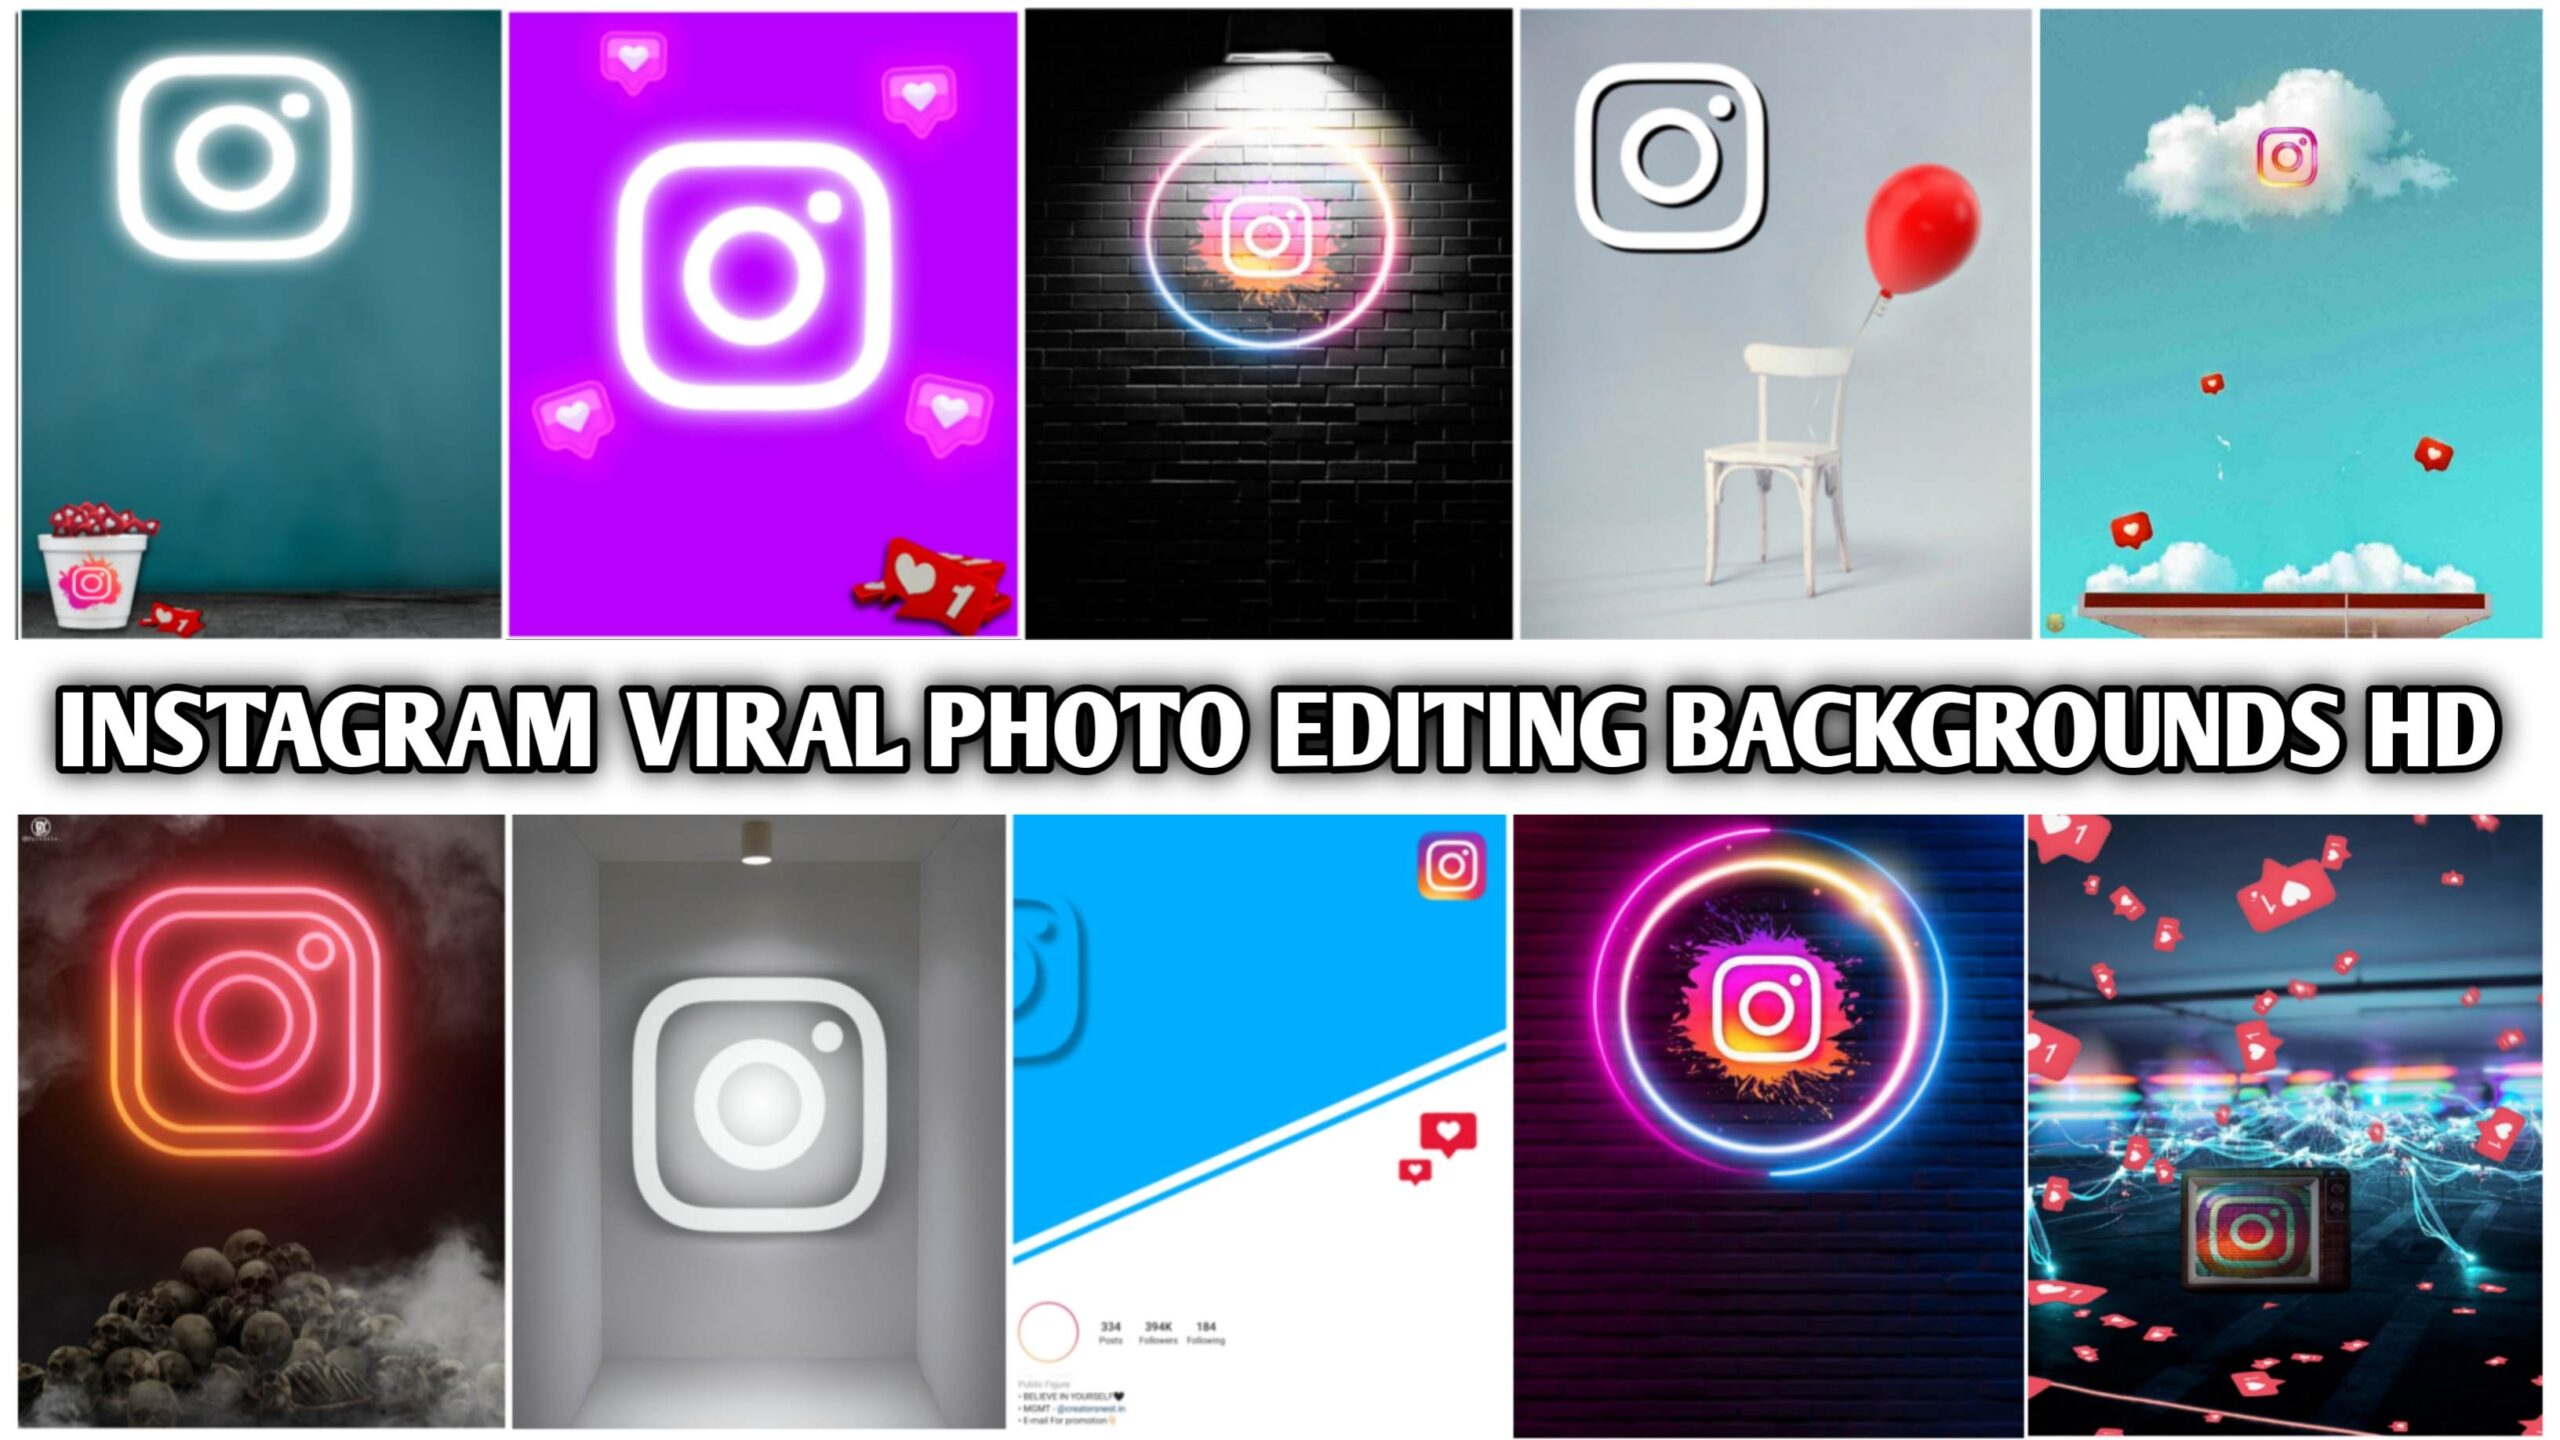 Instagram Viral Photo Editing Background Hd